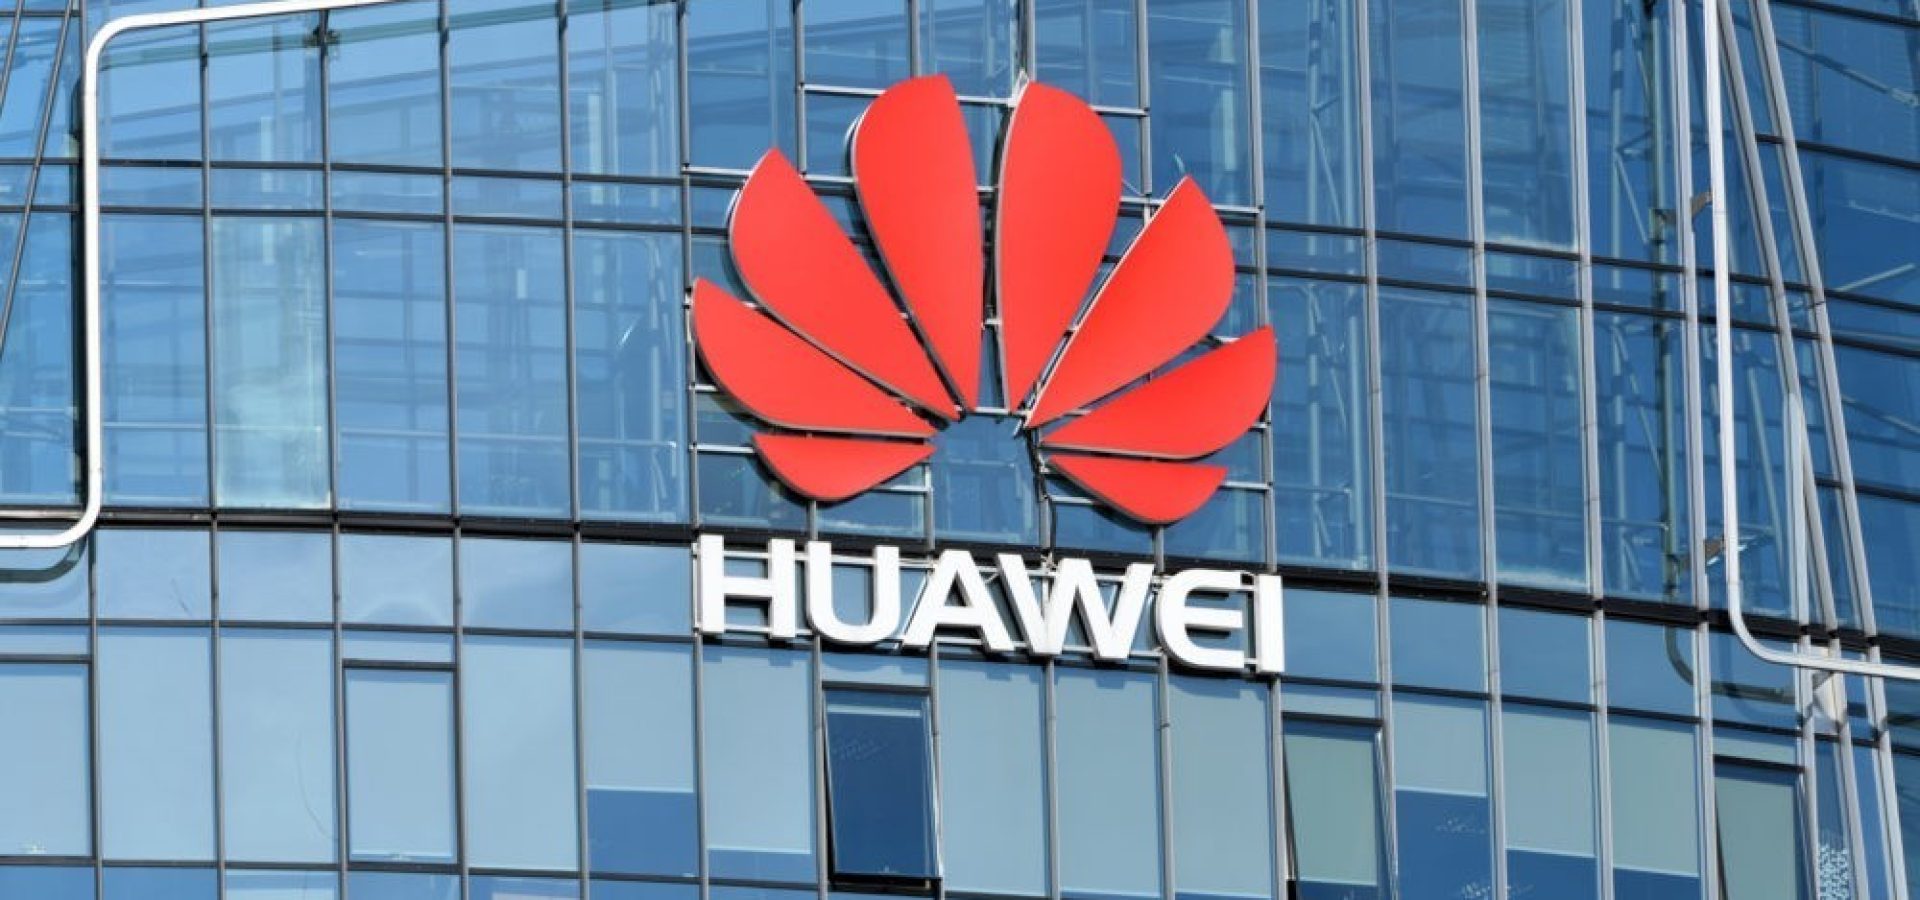 Huawei and the G-20 summit